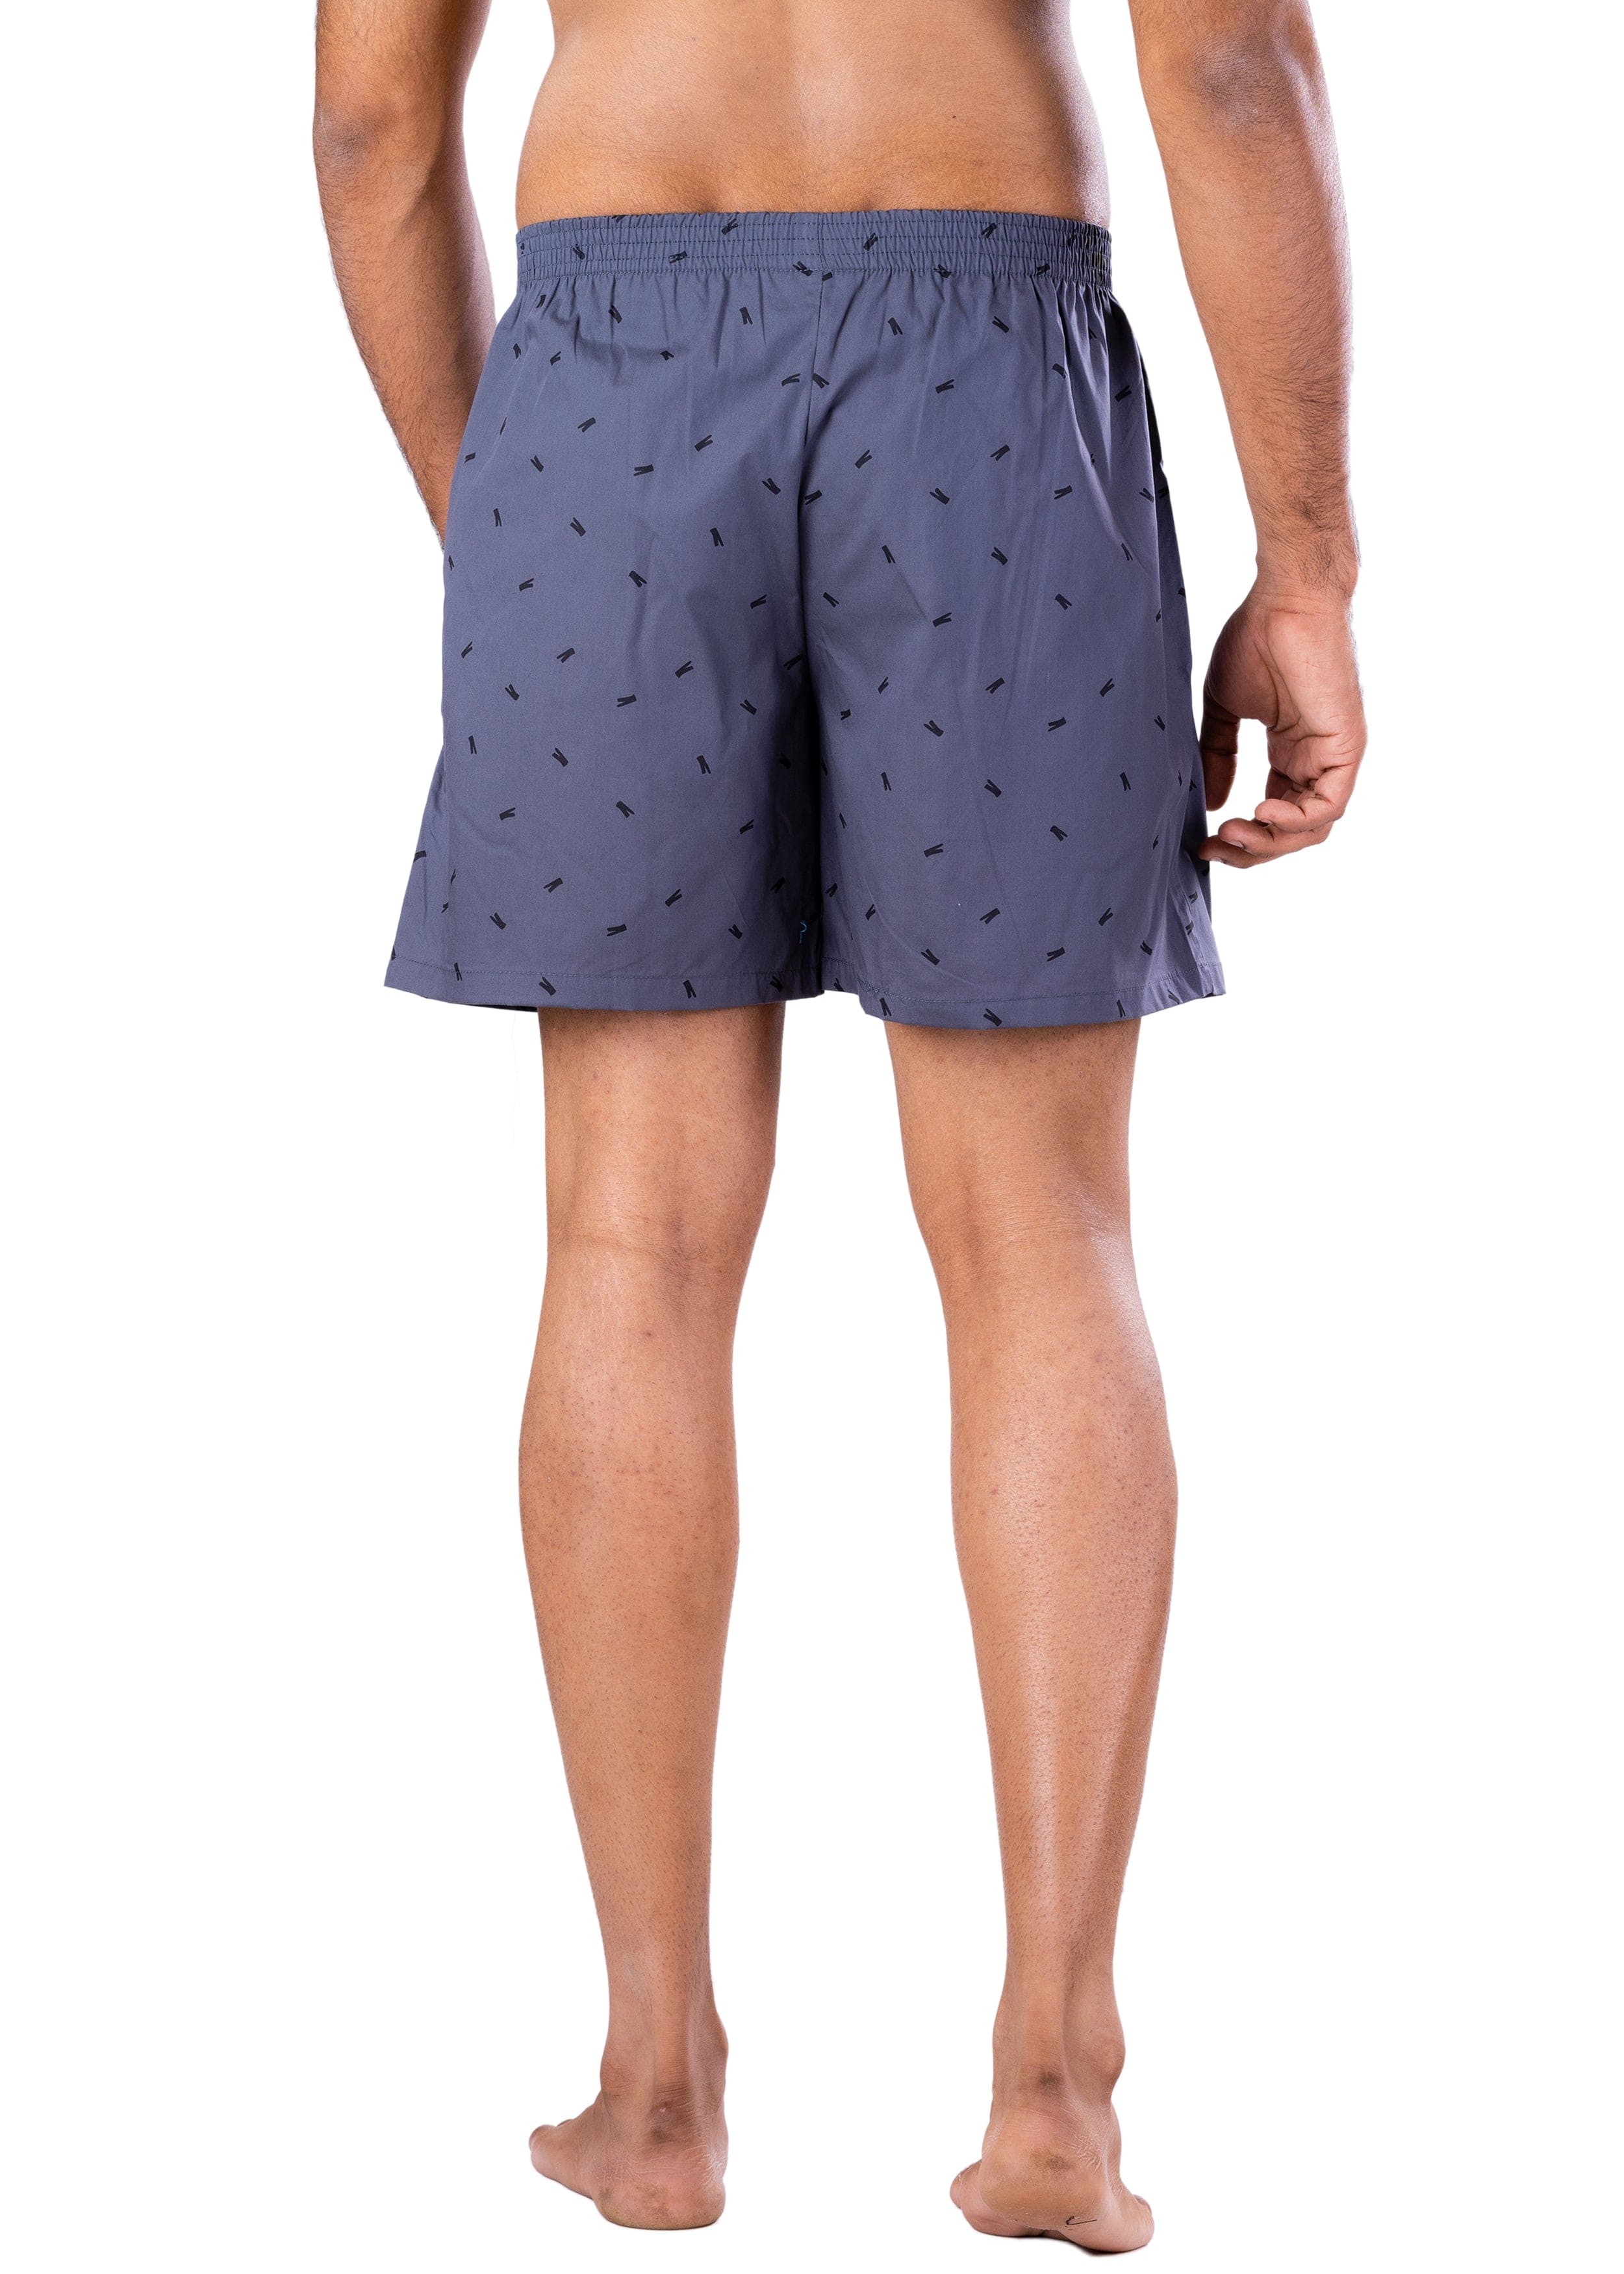 Abstract Pattern Printed Grey Cotton Boxer For Men